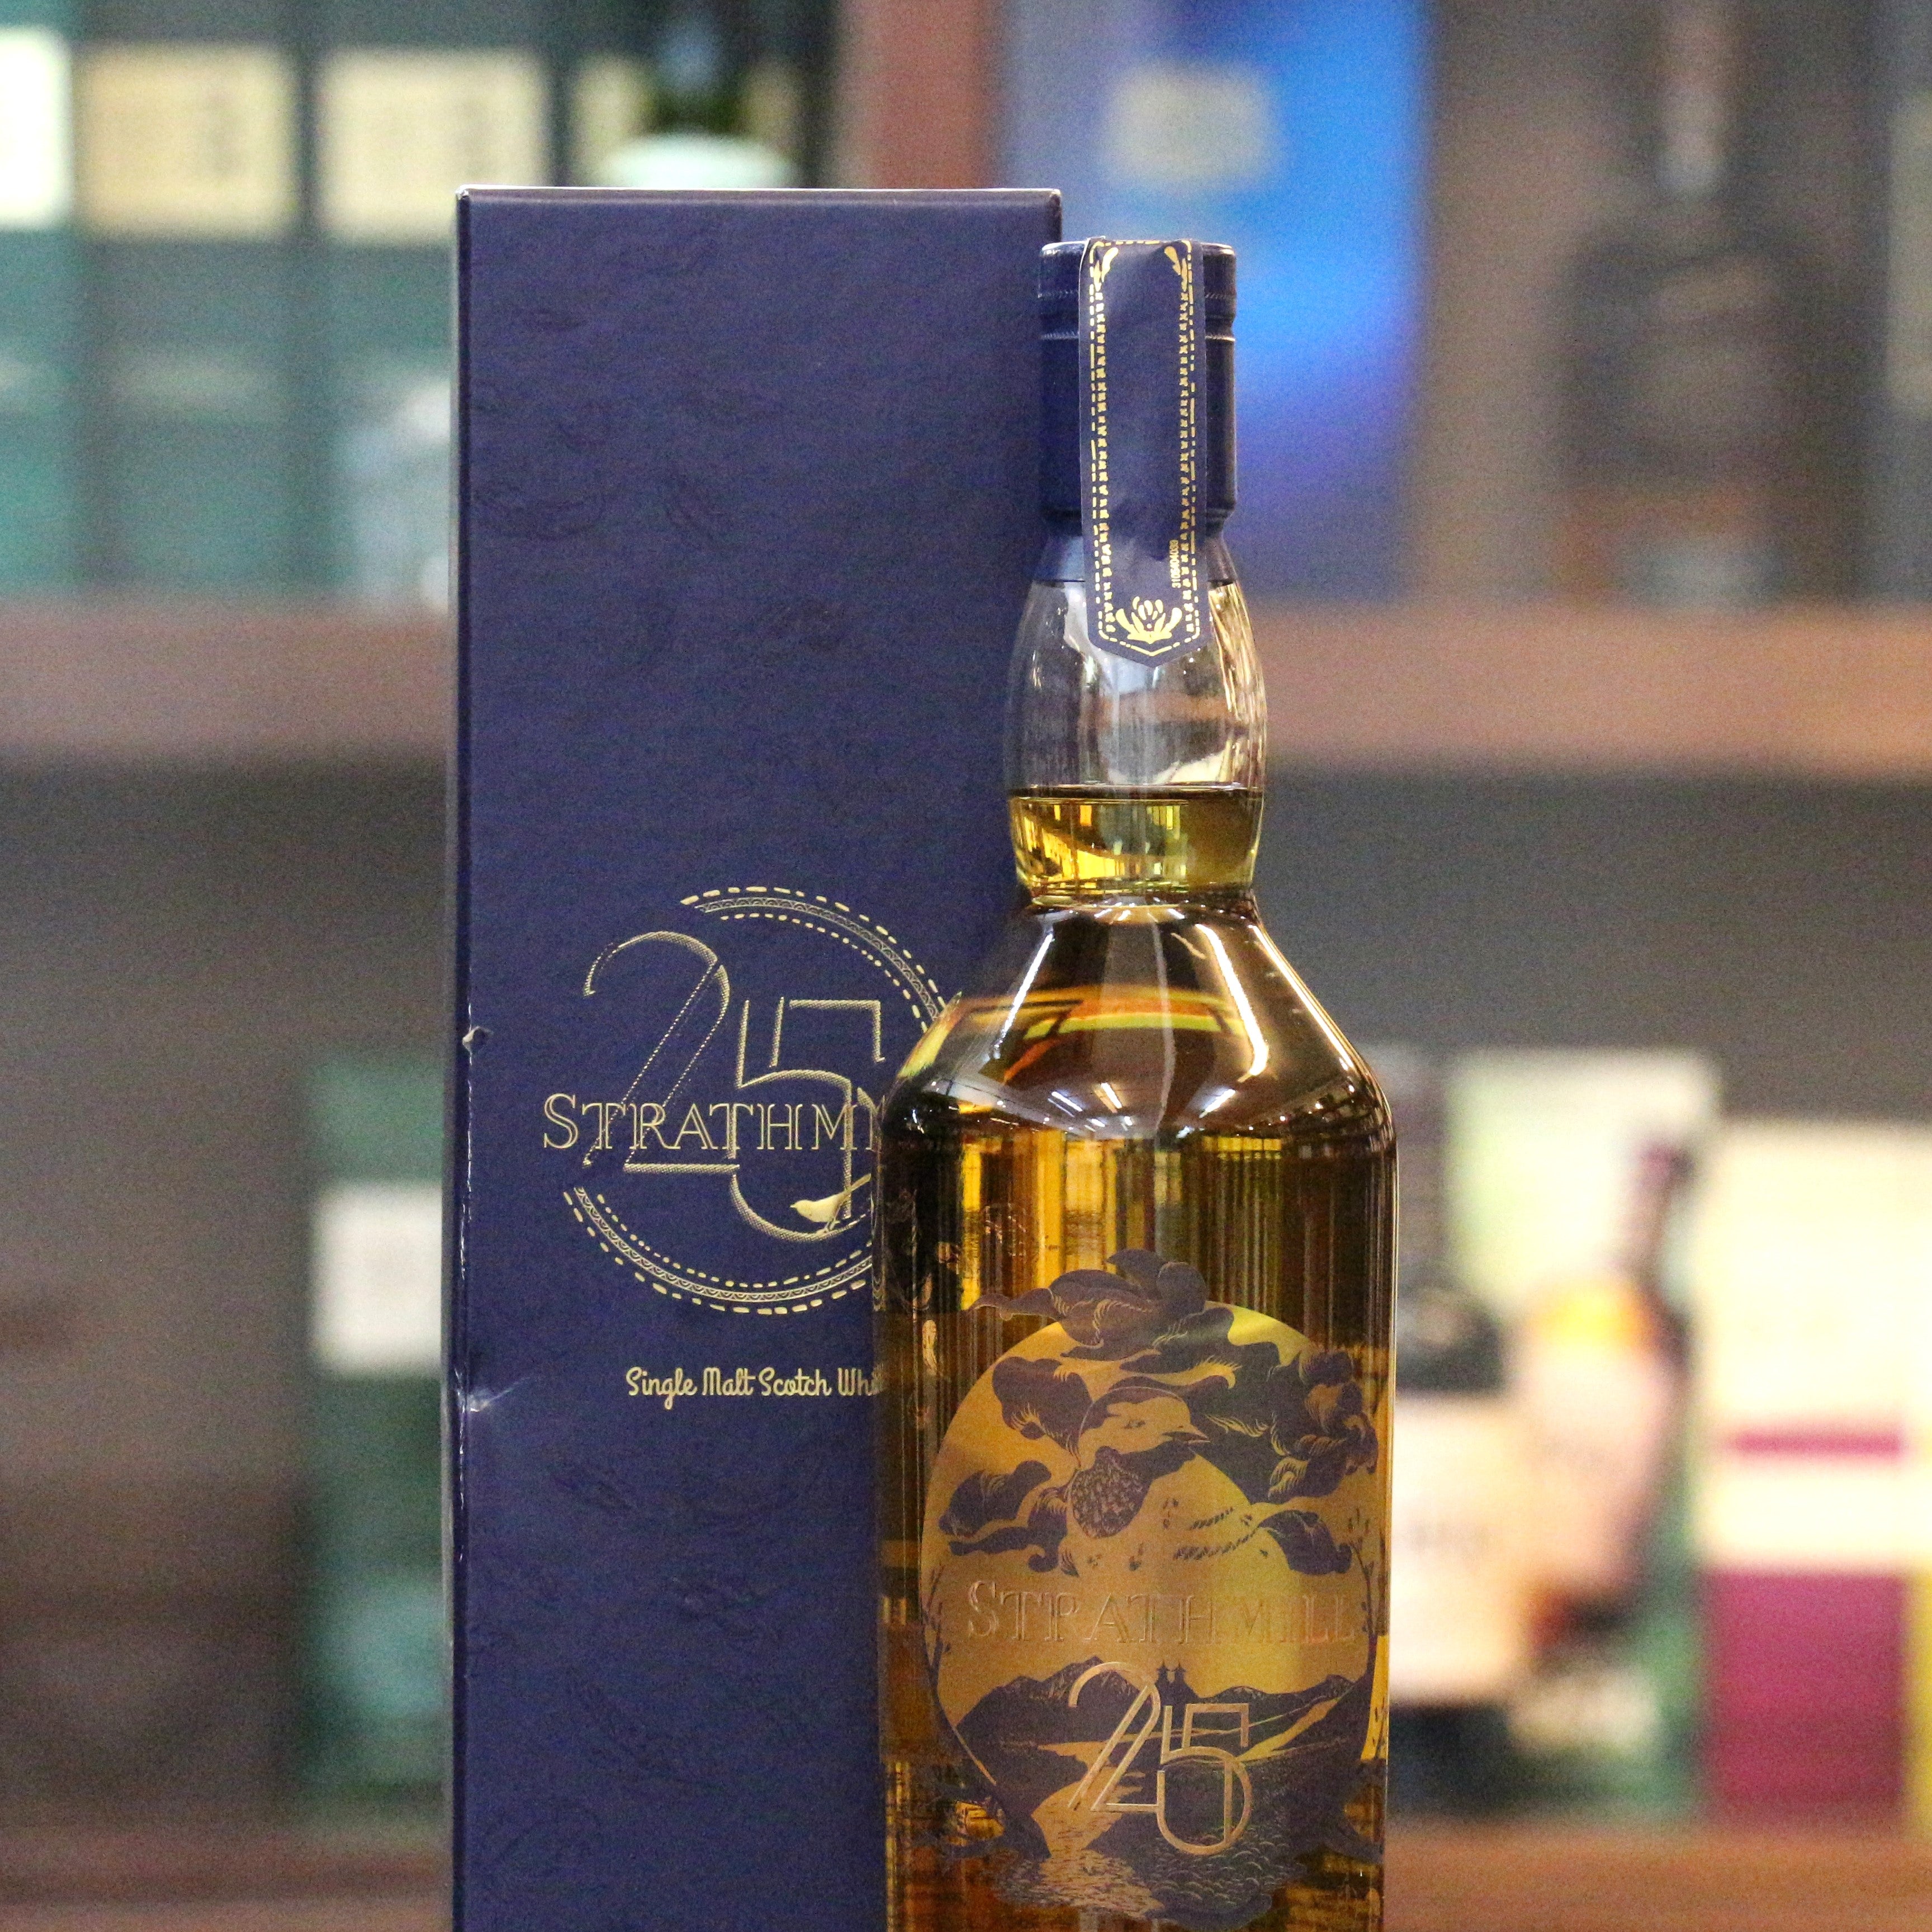 Strathmill 25 Year Natural Cask Strength Single Malt Scotch Whisky 2014 Limited Release